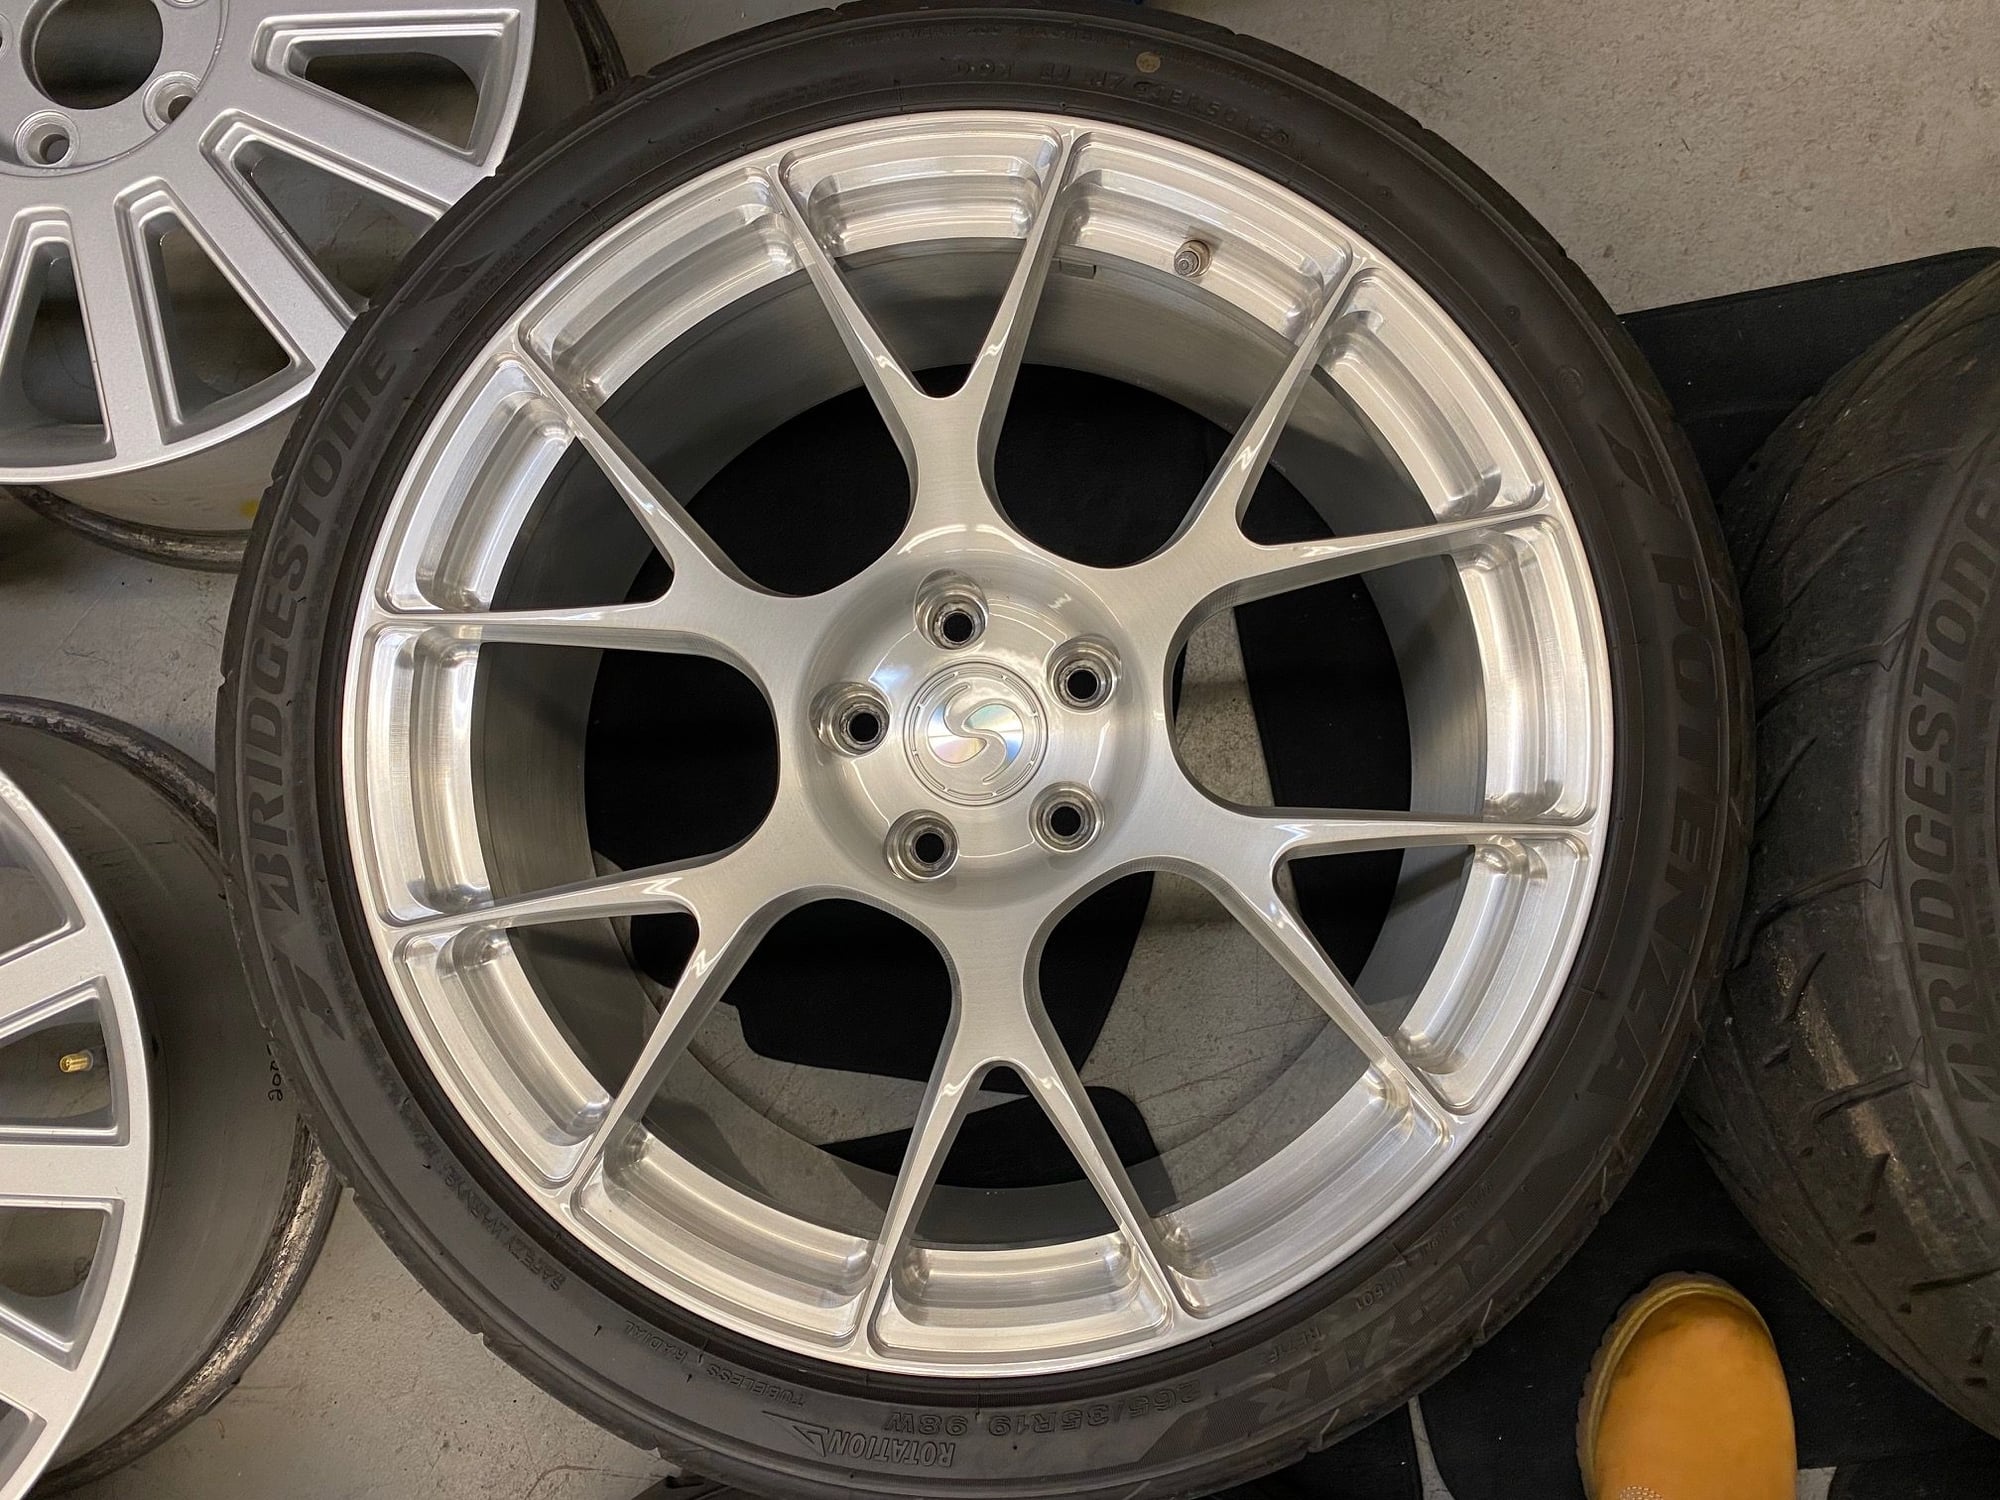 Wheels and Tires/Axles - Signature Wheel SV503 19x10.5 +57, 19x9.5 +30, 5x112 w/ RE71R tires C63s Sedan/Coupe - Used - 2015 to 2021 Mercedes-Benz C63 AMG S - Edmonds, WA 98020, United States